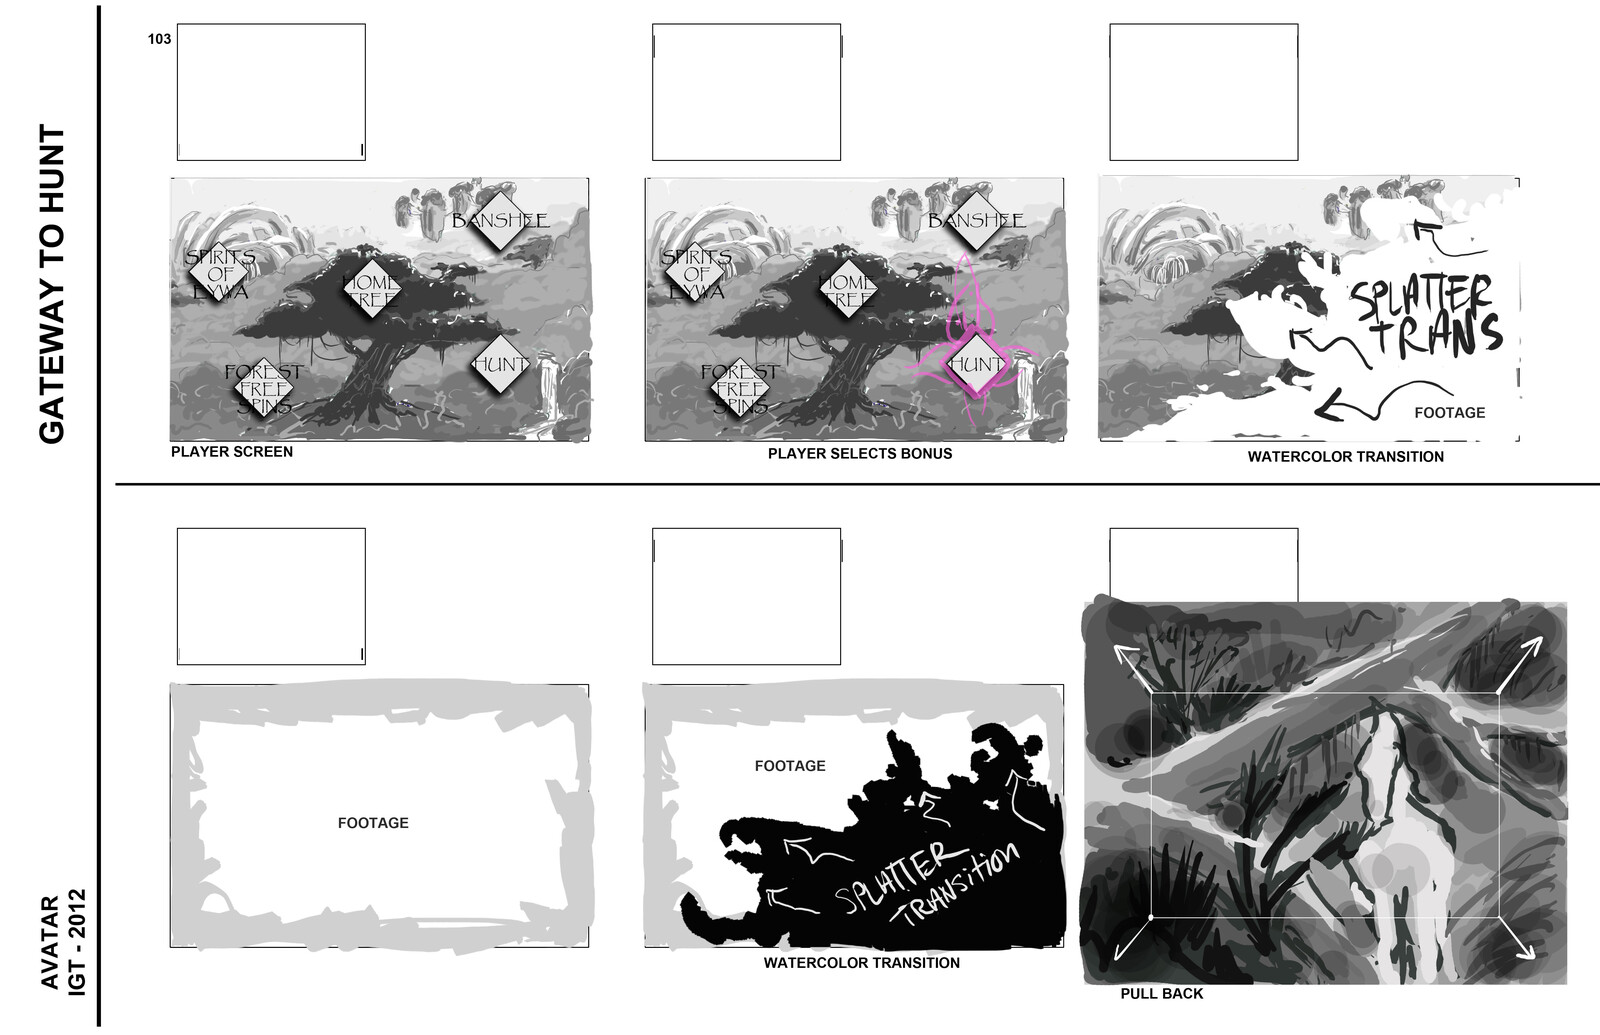 Storyboards showing the Player screen when a bonus was triggered. These were to help guide the 3D artist with camera moves and timing.